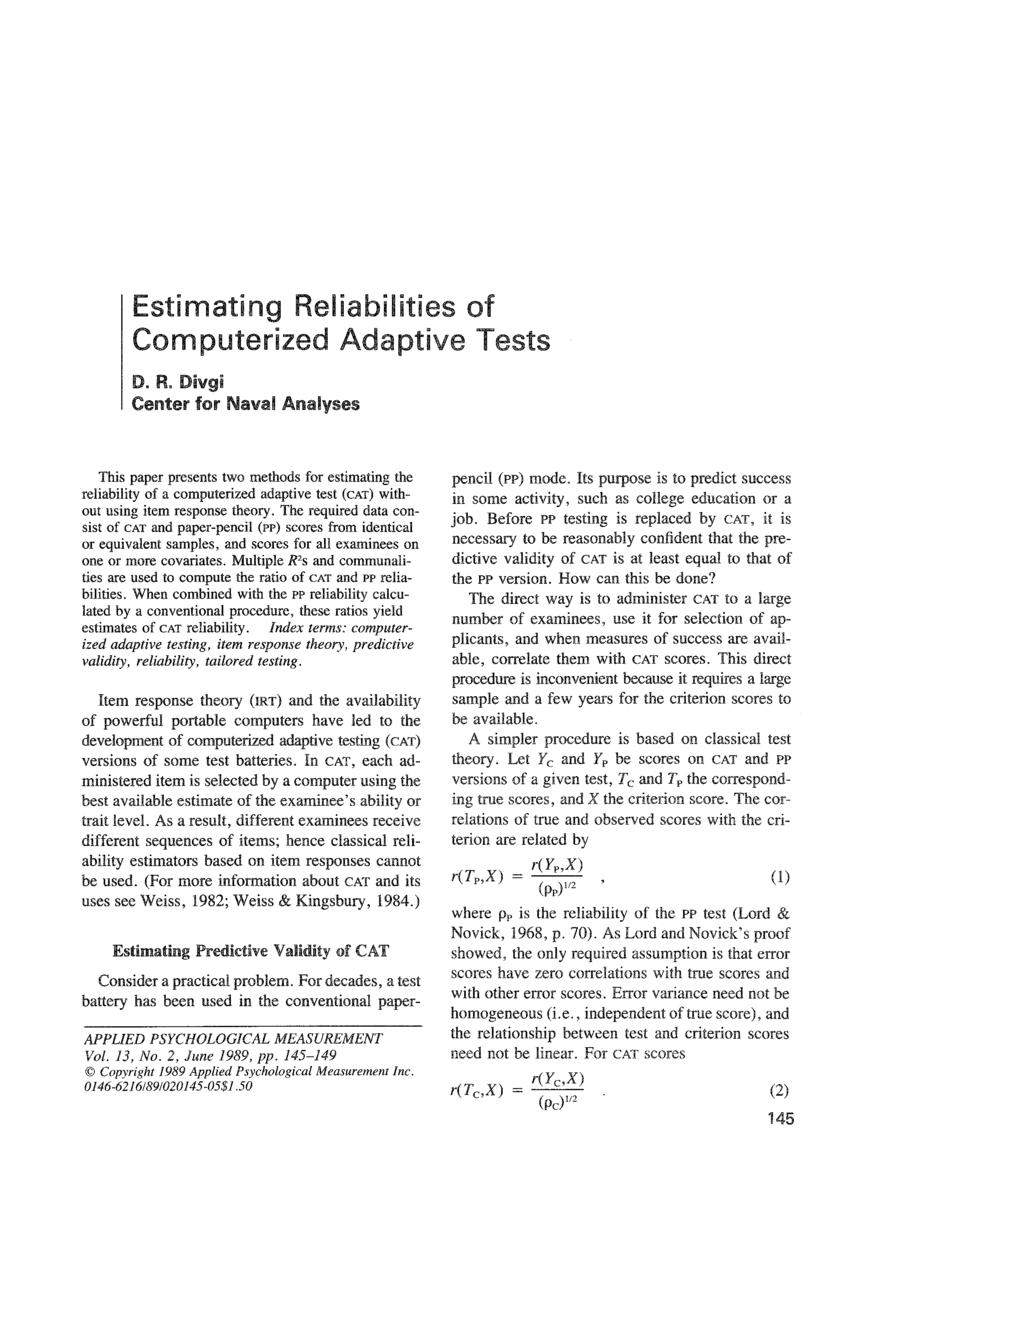 Estimating Reliabilities of Computerized Adaptive Tests D. R. Divgi Center for Naval Analyses This paper presents two methods for estimating the reliability of a computerized adaptive test (CAT) without using item response theory.